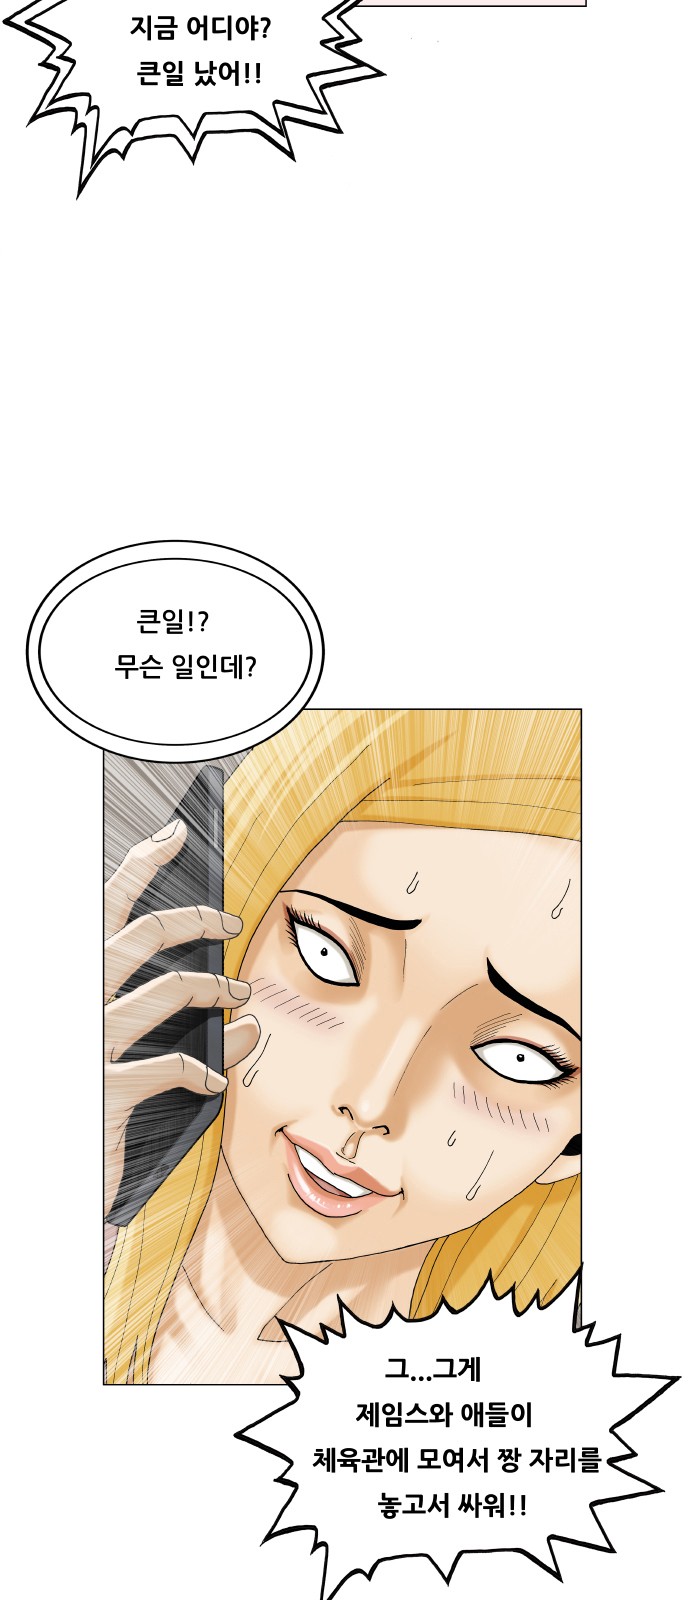 Ultimate Legend - Kang Hae Hyo - Chapter 483 - Page 2